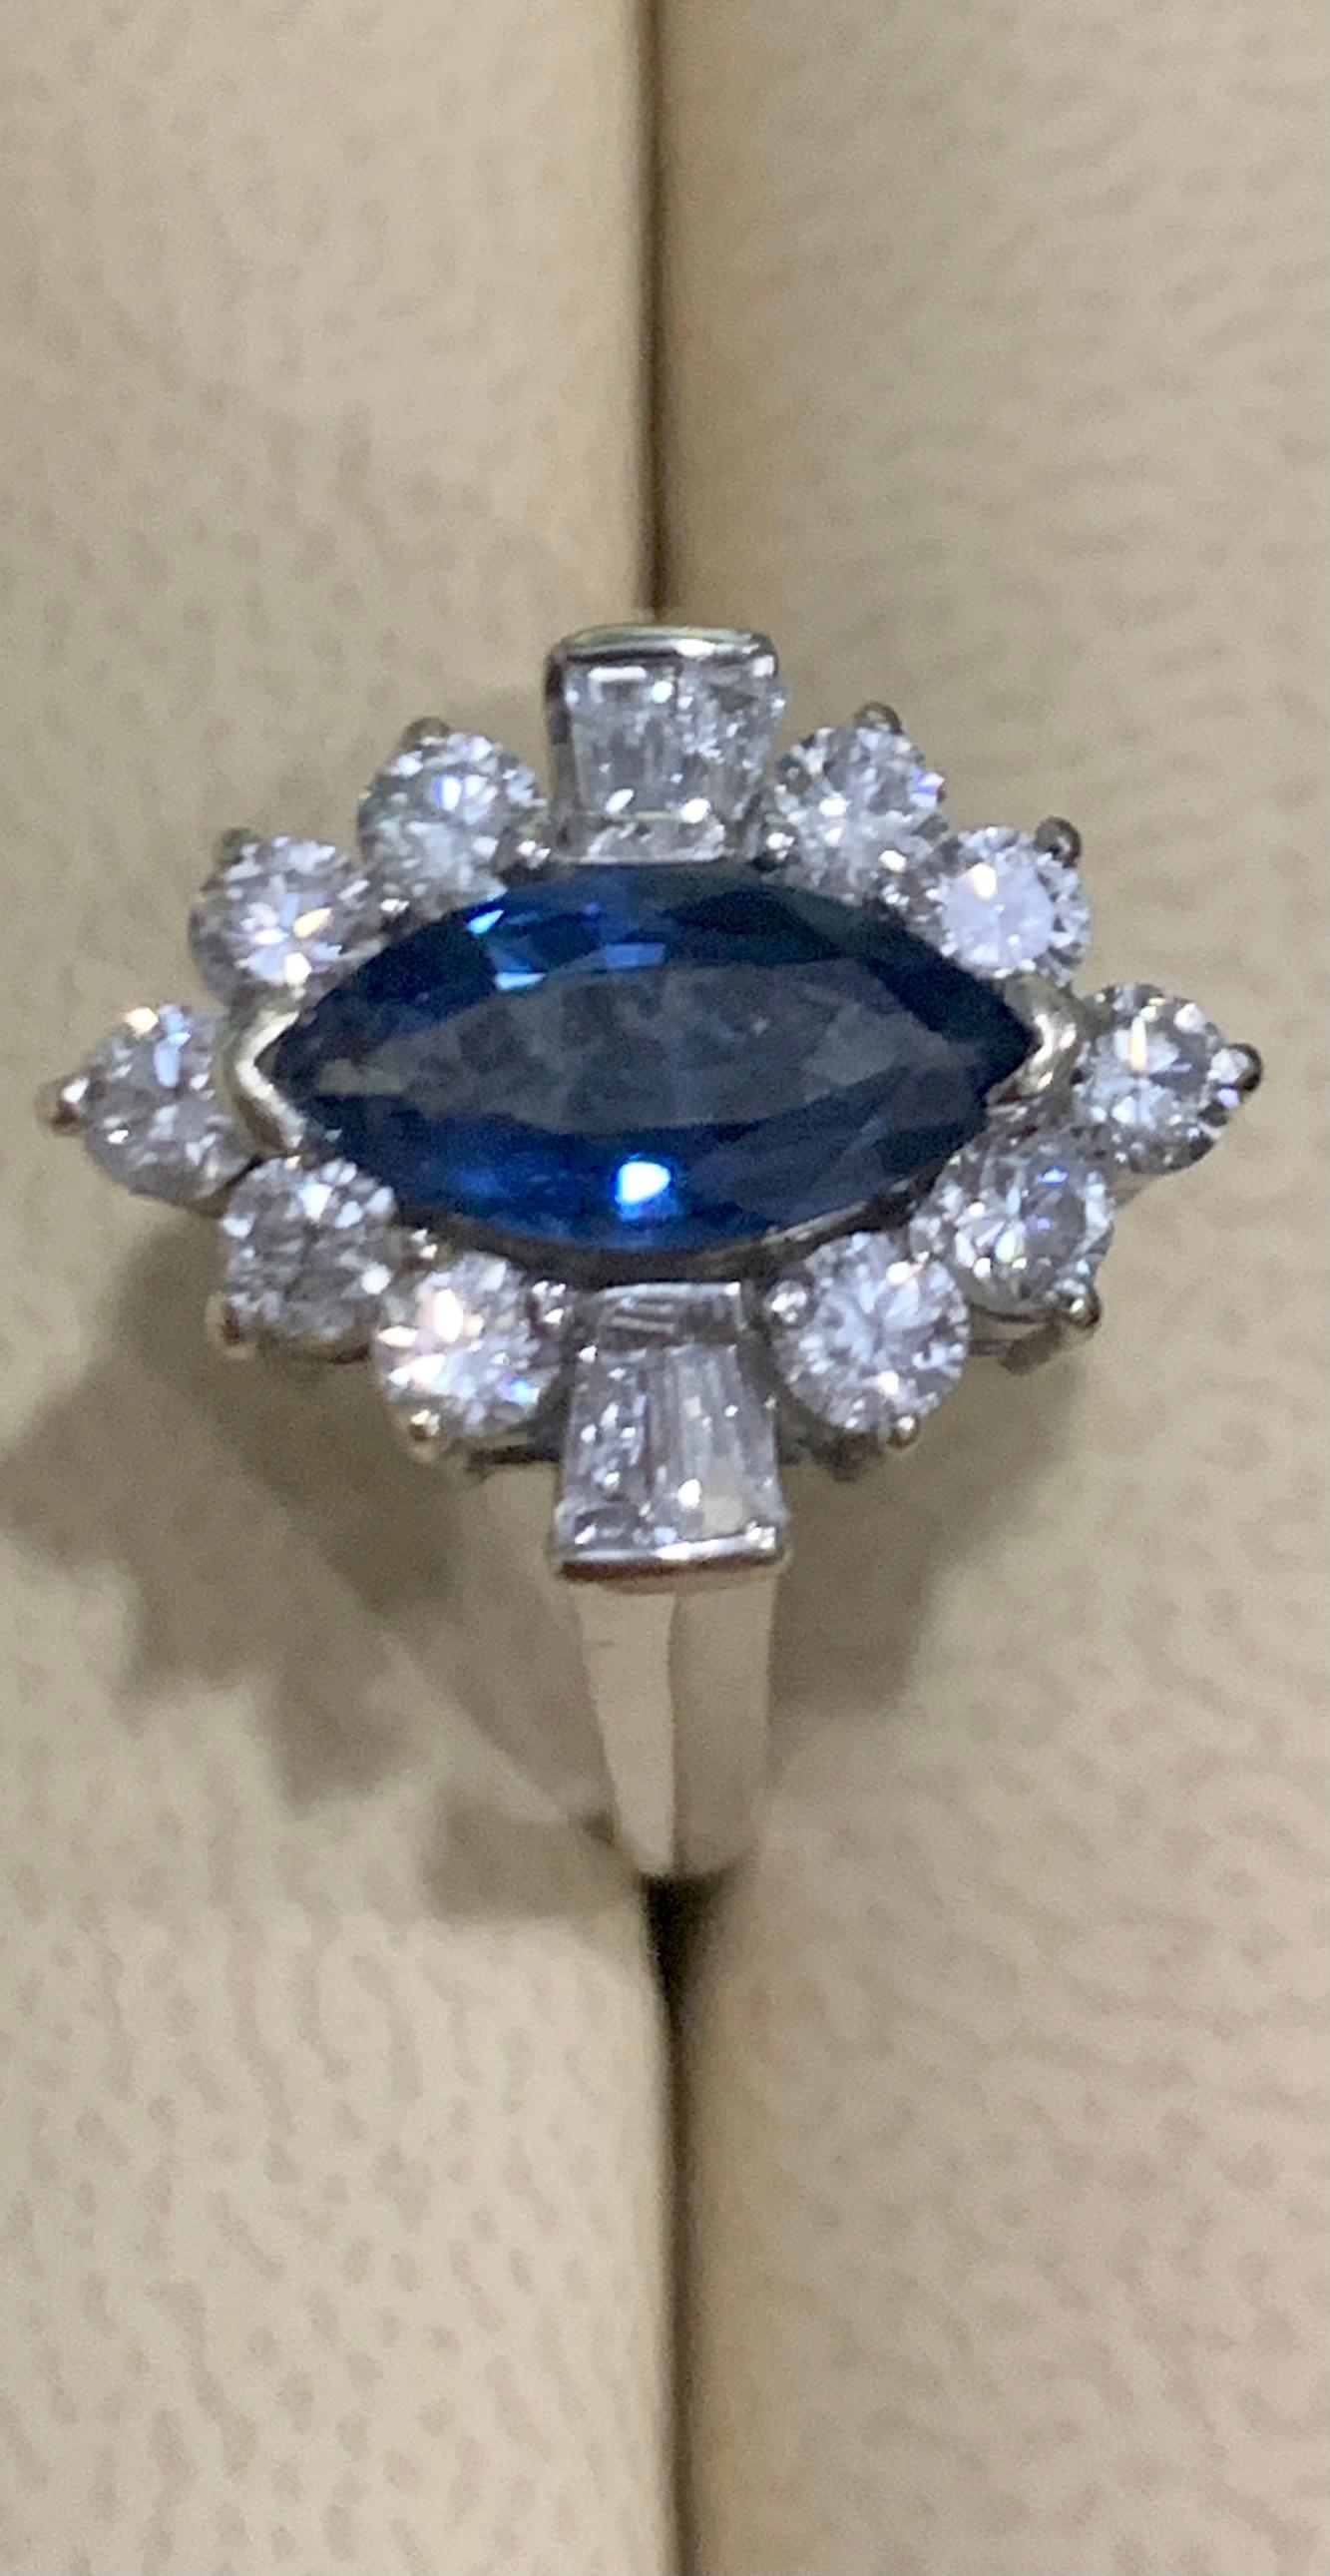 2.5 Ct Blue Sapphire & 1.2Ct Diamond Cocktail Ring in 18 Karat White Gold Estate In Excellent Condition For Sale In New York, NY